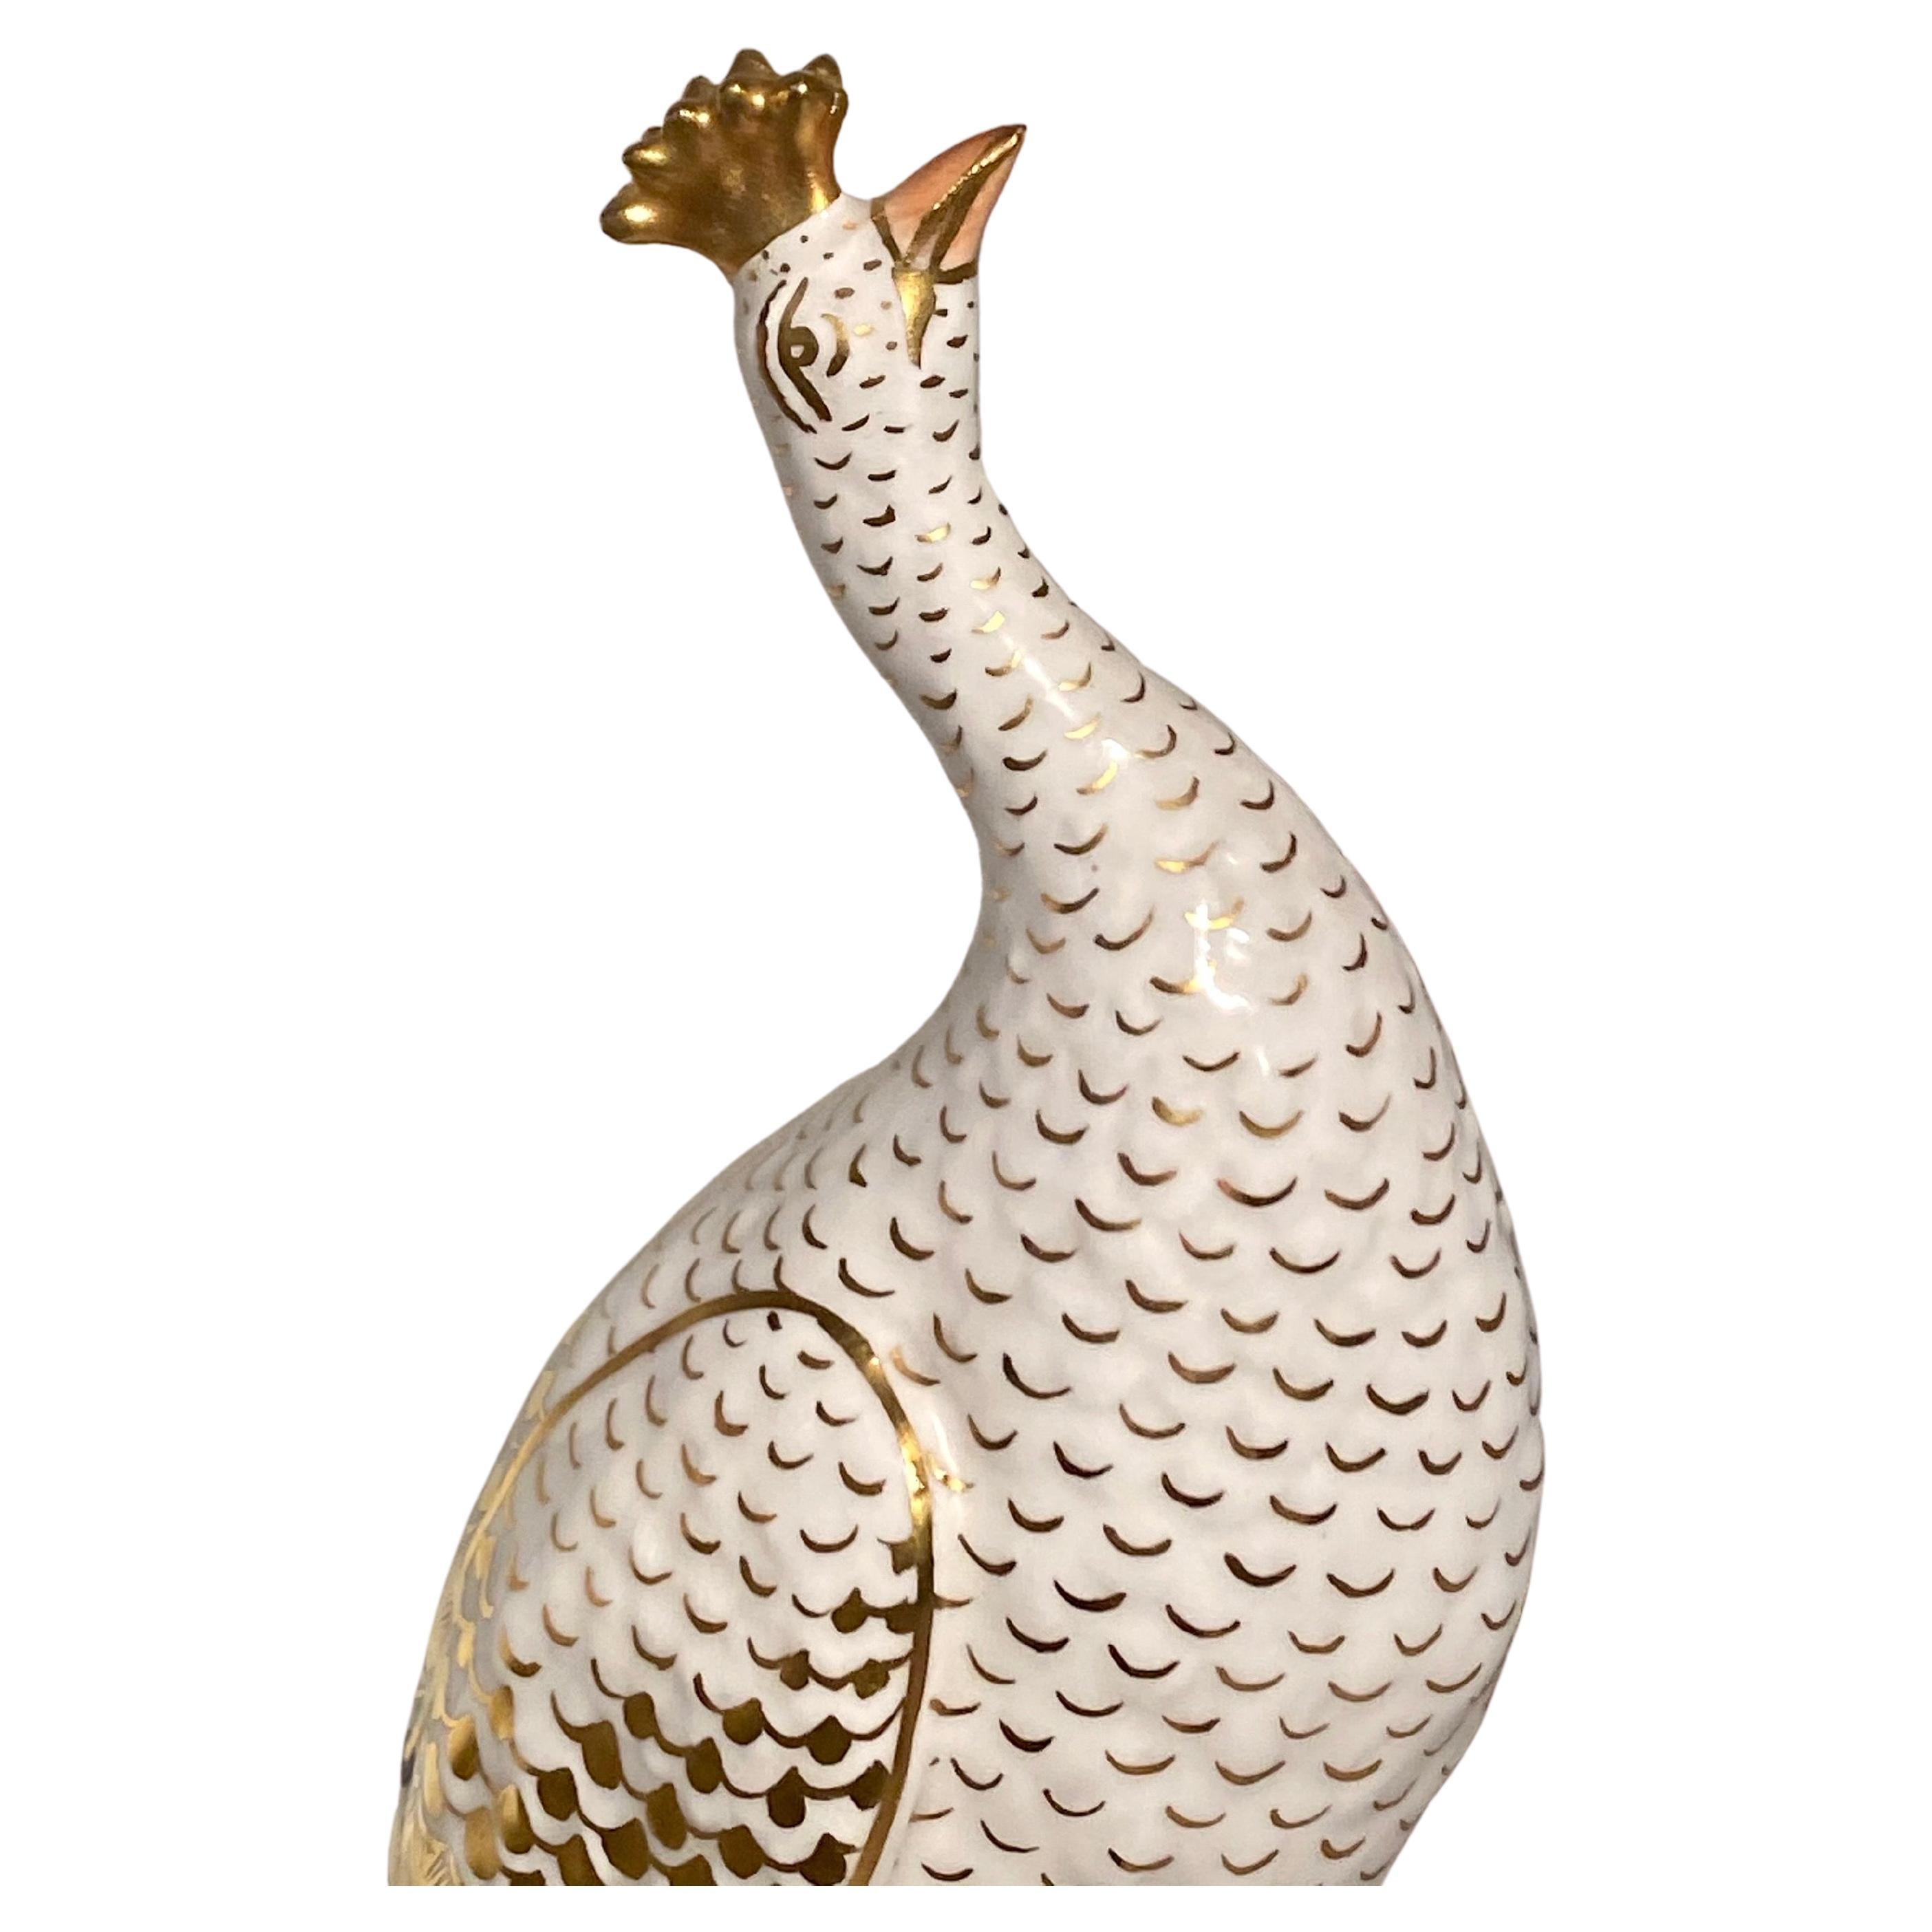 Royal Crown Derby Porcelain Figure, Modelled as a Peacock For Sale 3